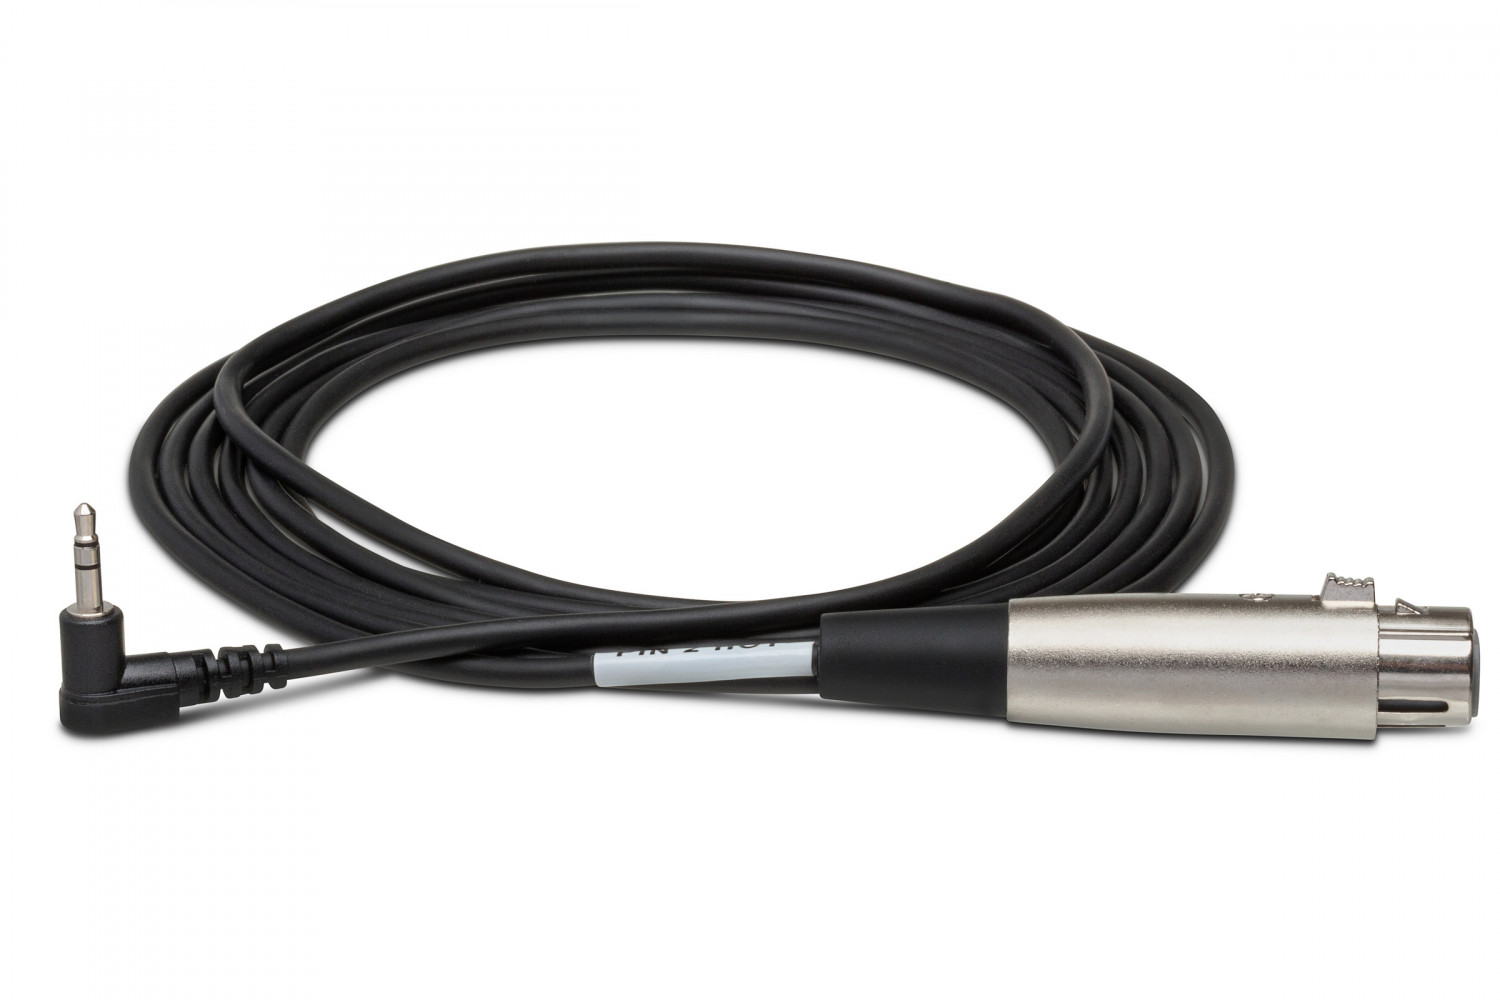 Hosa XVM-115F XLR Female to 1/8" TRS Male Cable